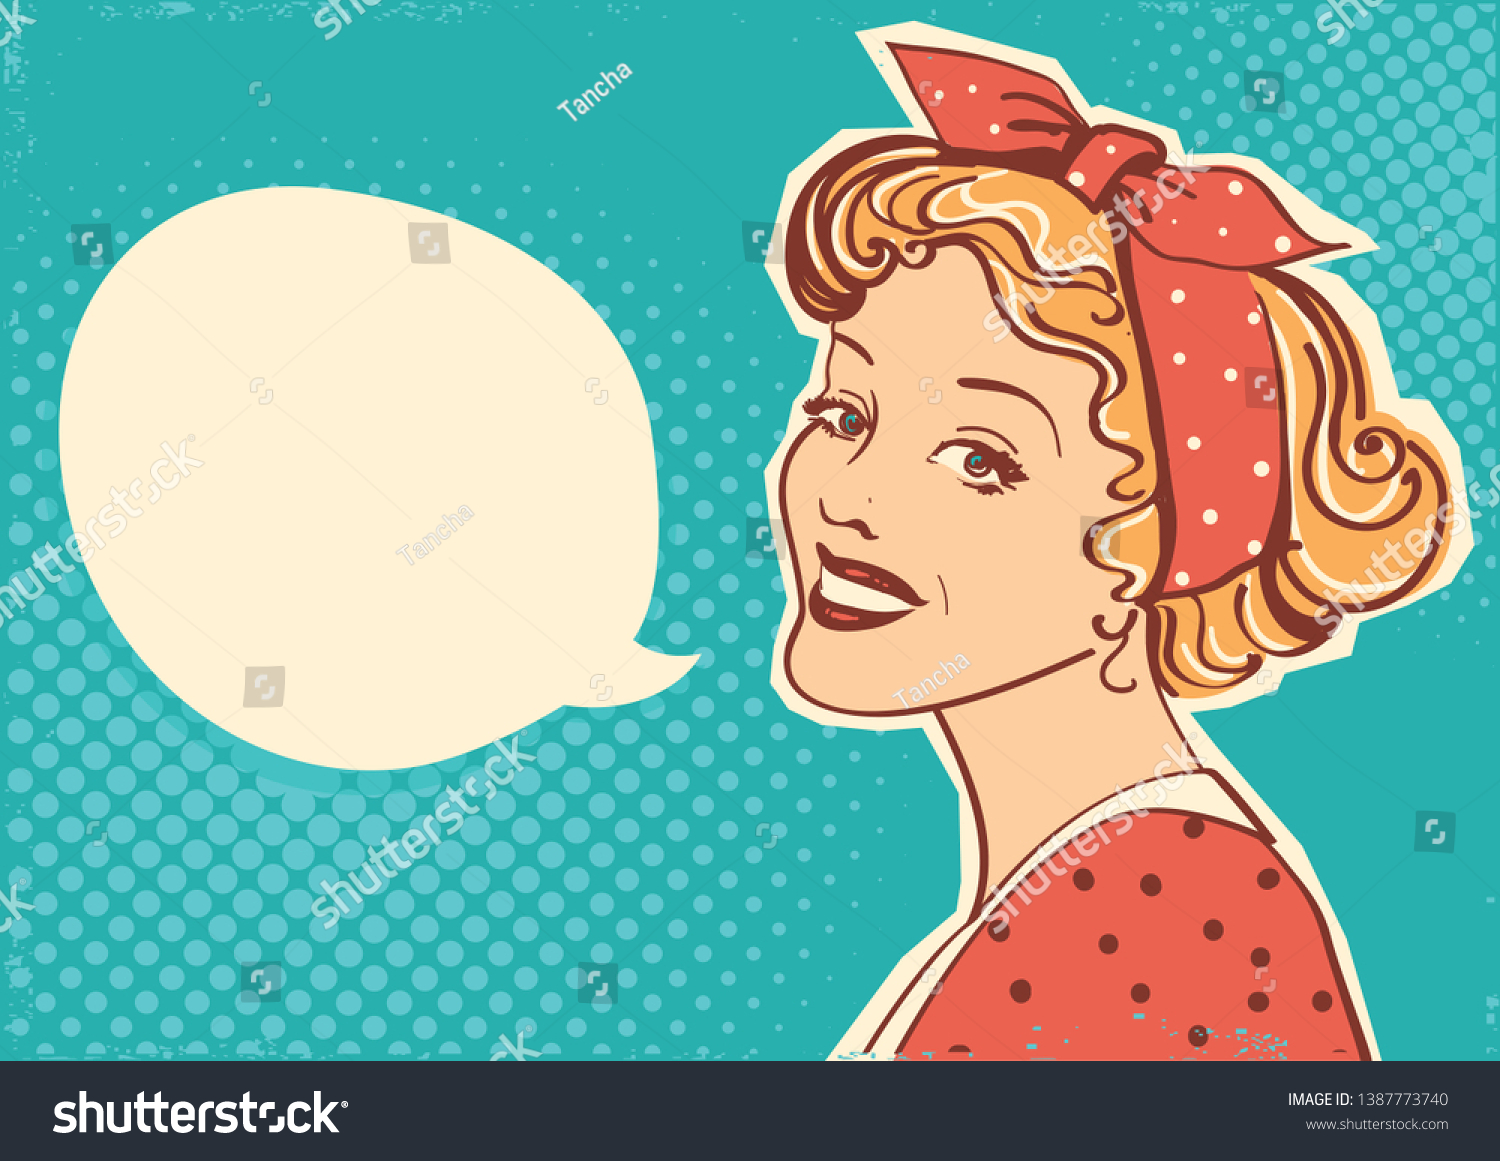 SVG of Young retro woman portrait with speach bubble for text.Vector illustration pop art background for design svg